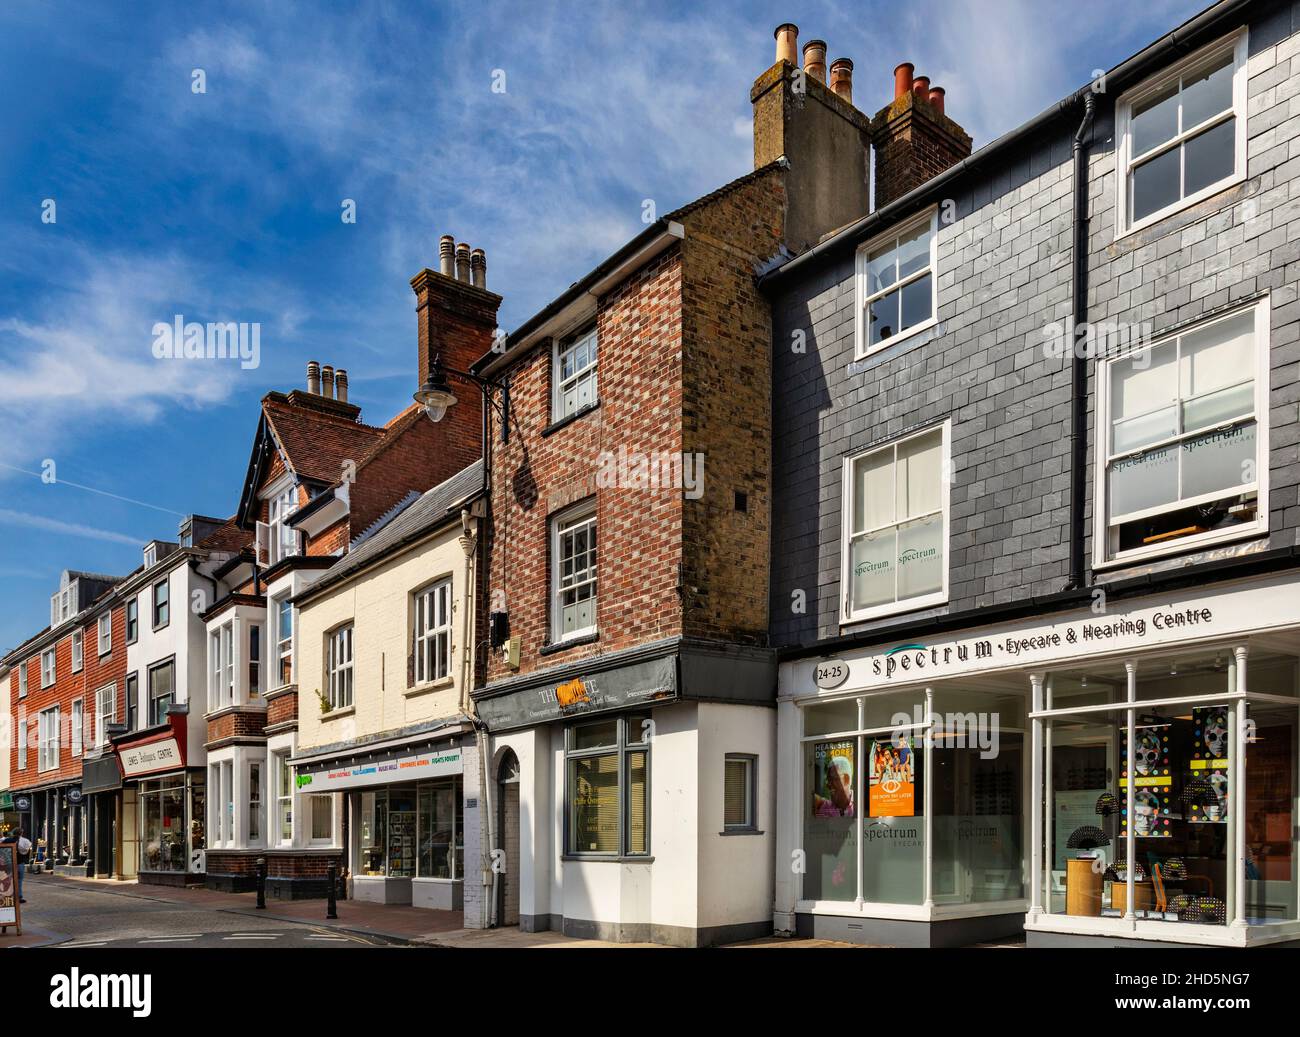 High street in Lewes, the county town of East Sussex, England. Stock Photo